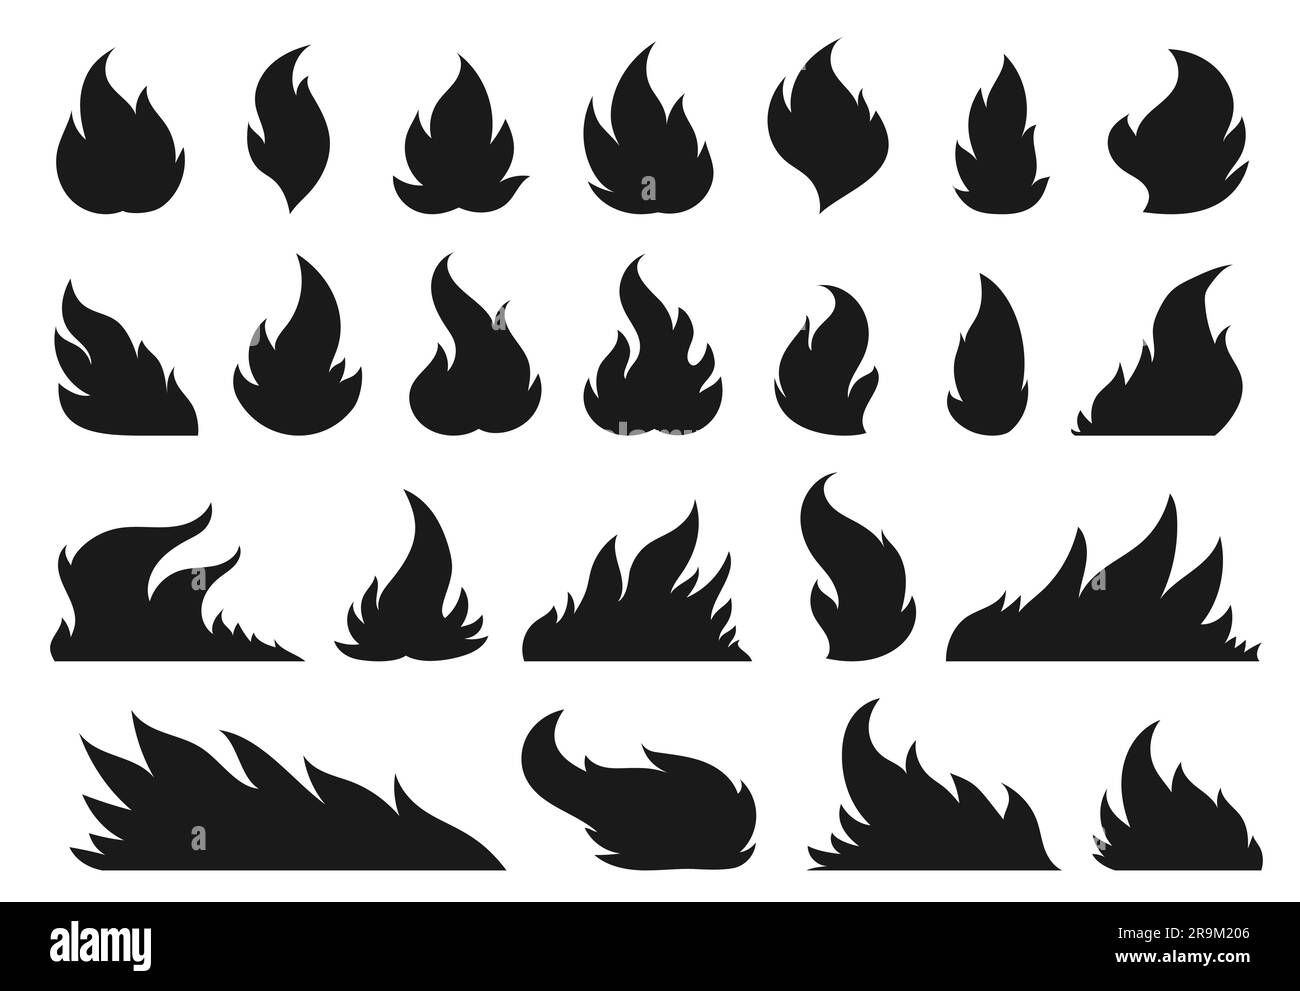 Fireball flame, hot fire black silhouette signs. Campfire fiery icon set. Furious flammable combustion flat clipart. Dangerous natural gas blazing. Burning wildfire effect, bonfires isolated on white Stock Vector